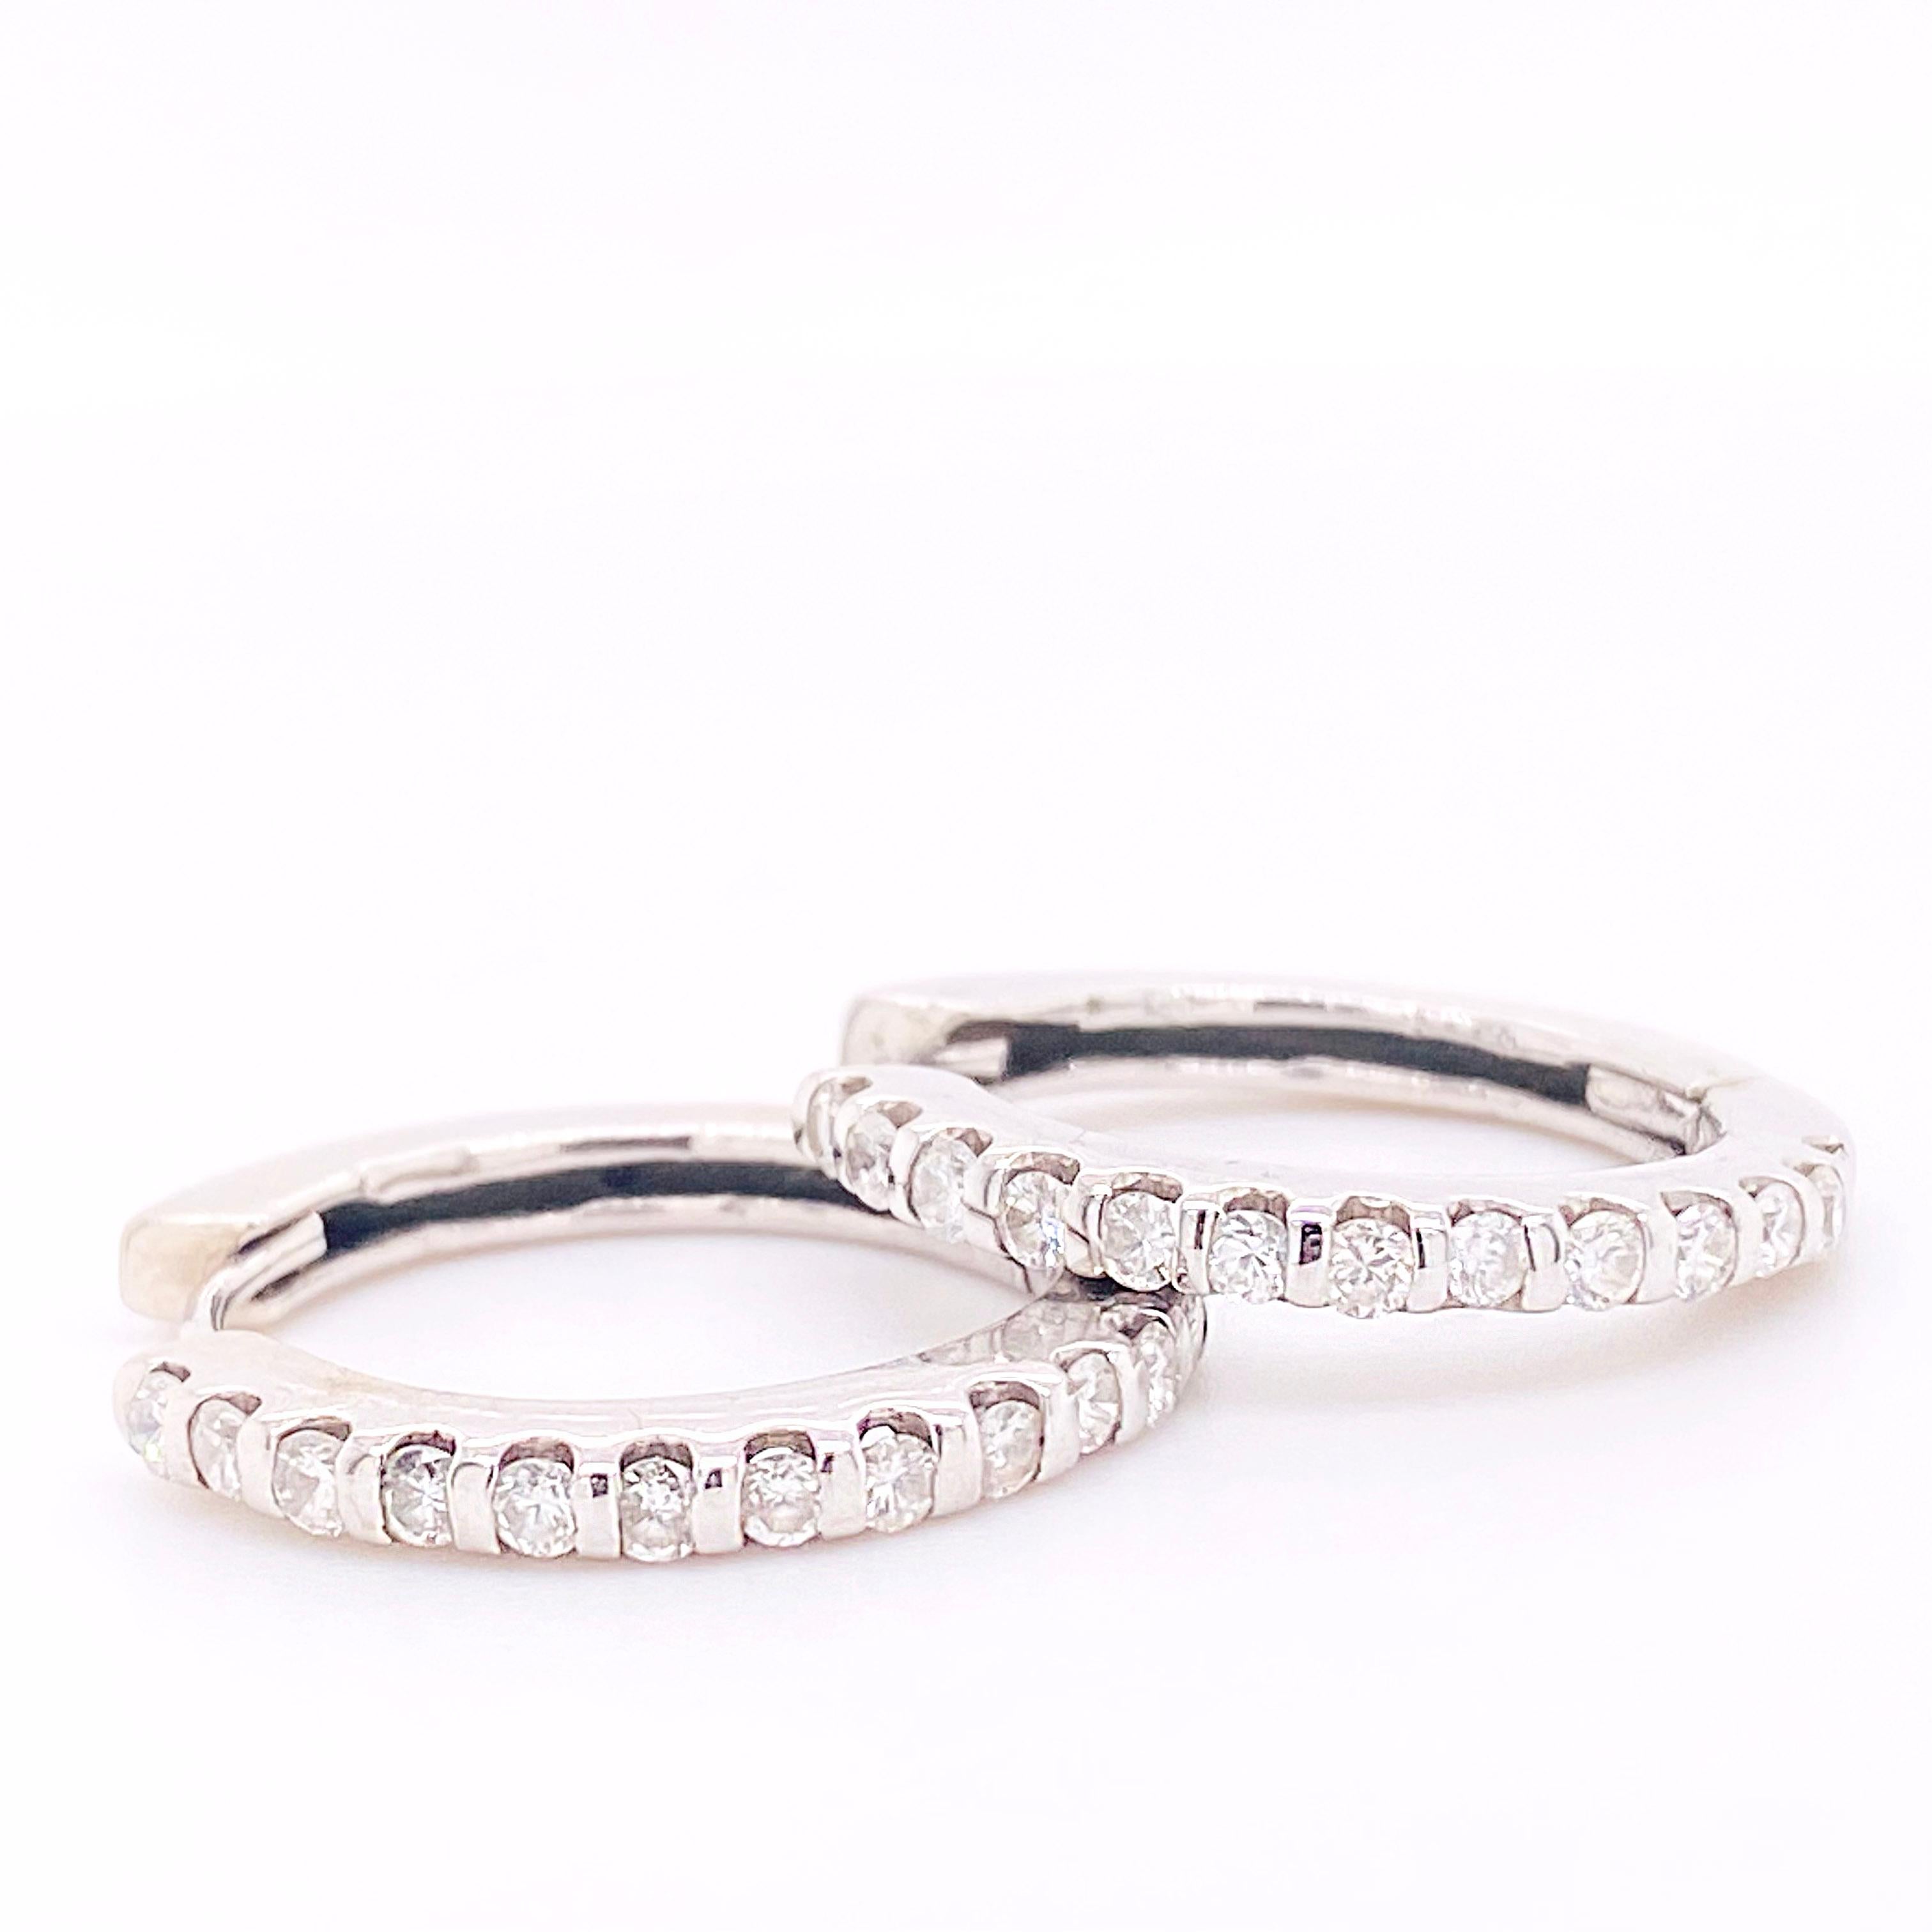 Are you wishing that you had hoop earrings that would not break, bend, or mis-shape? These earrings were made for durability and beauty. The design is a one inch (1 inch) hoop that has extra sturdy construction. The string of diamonds is connected